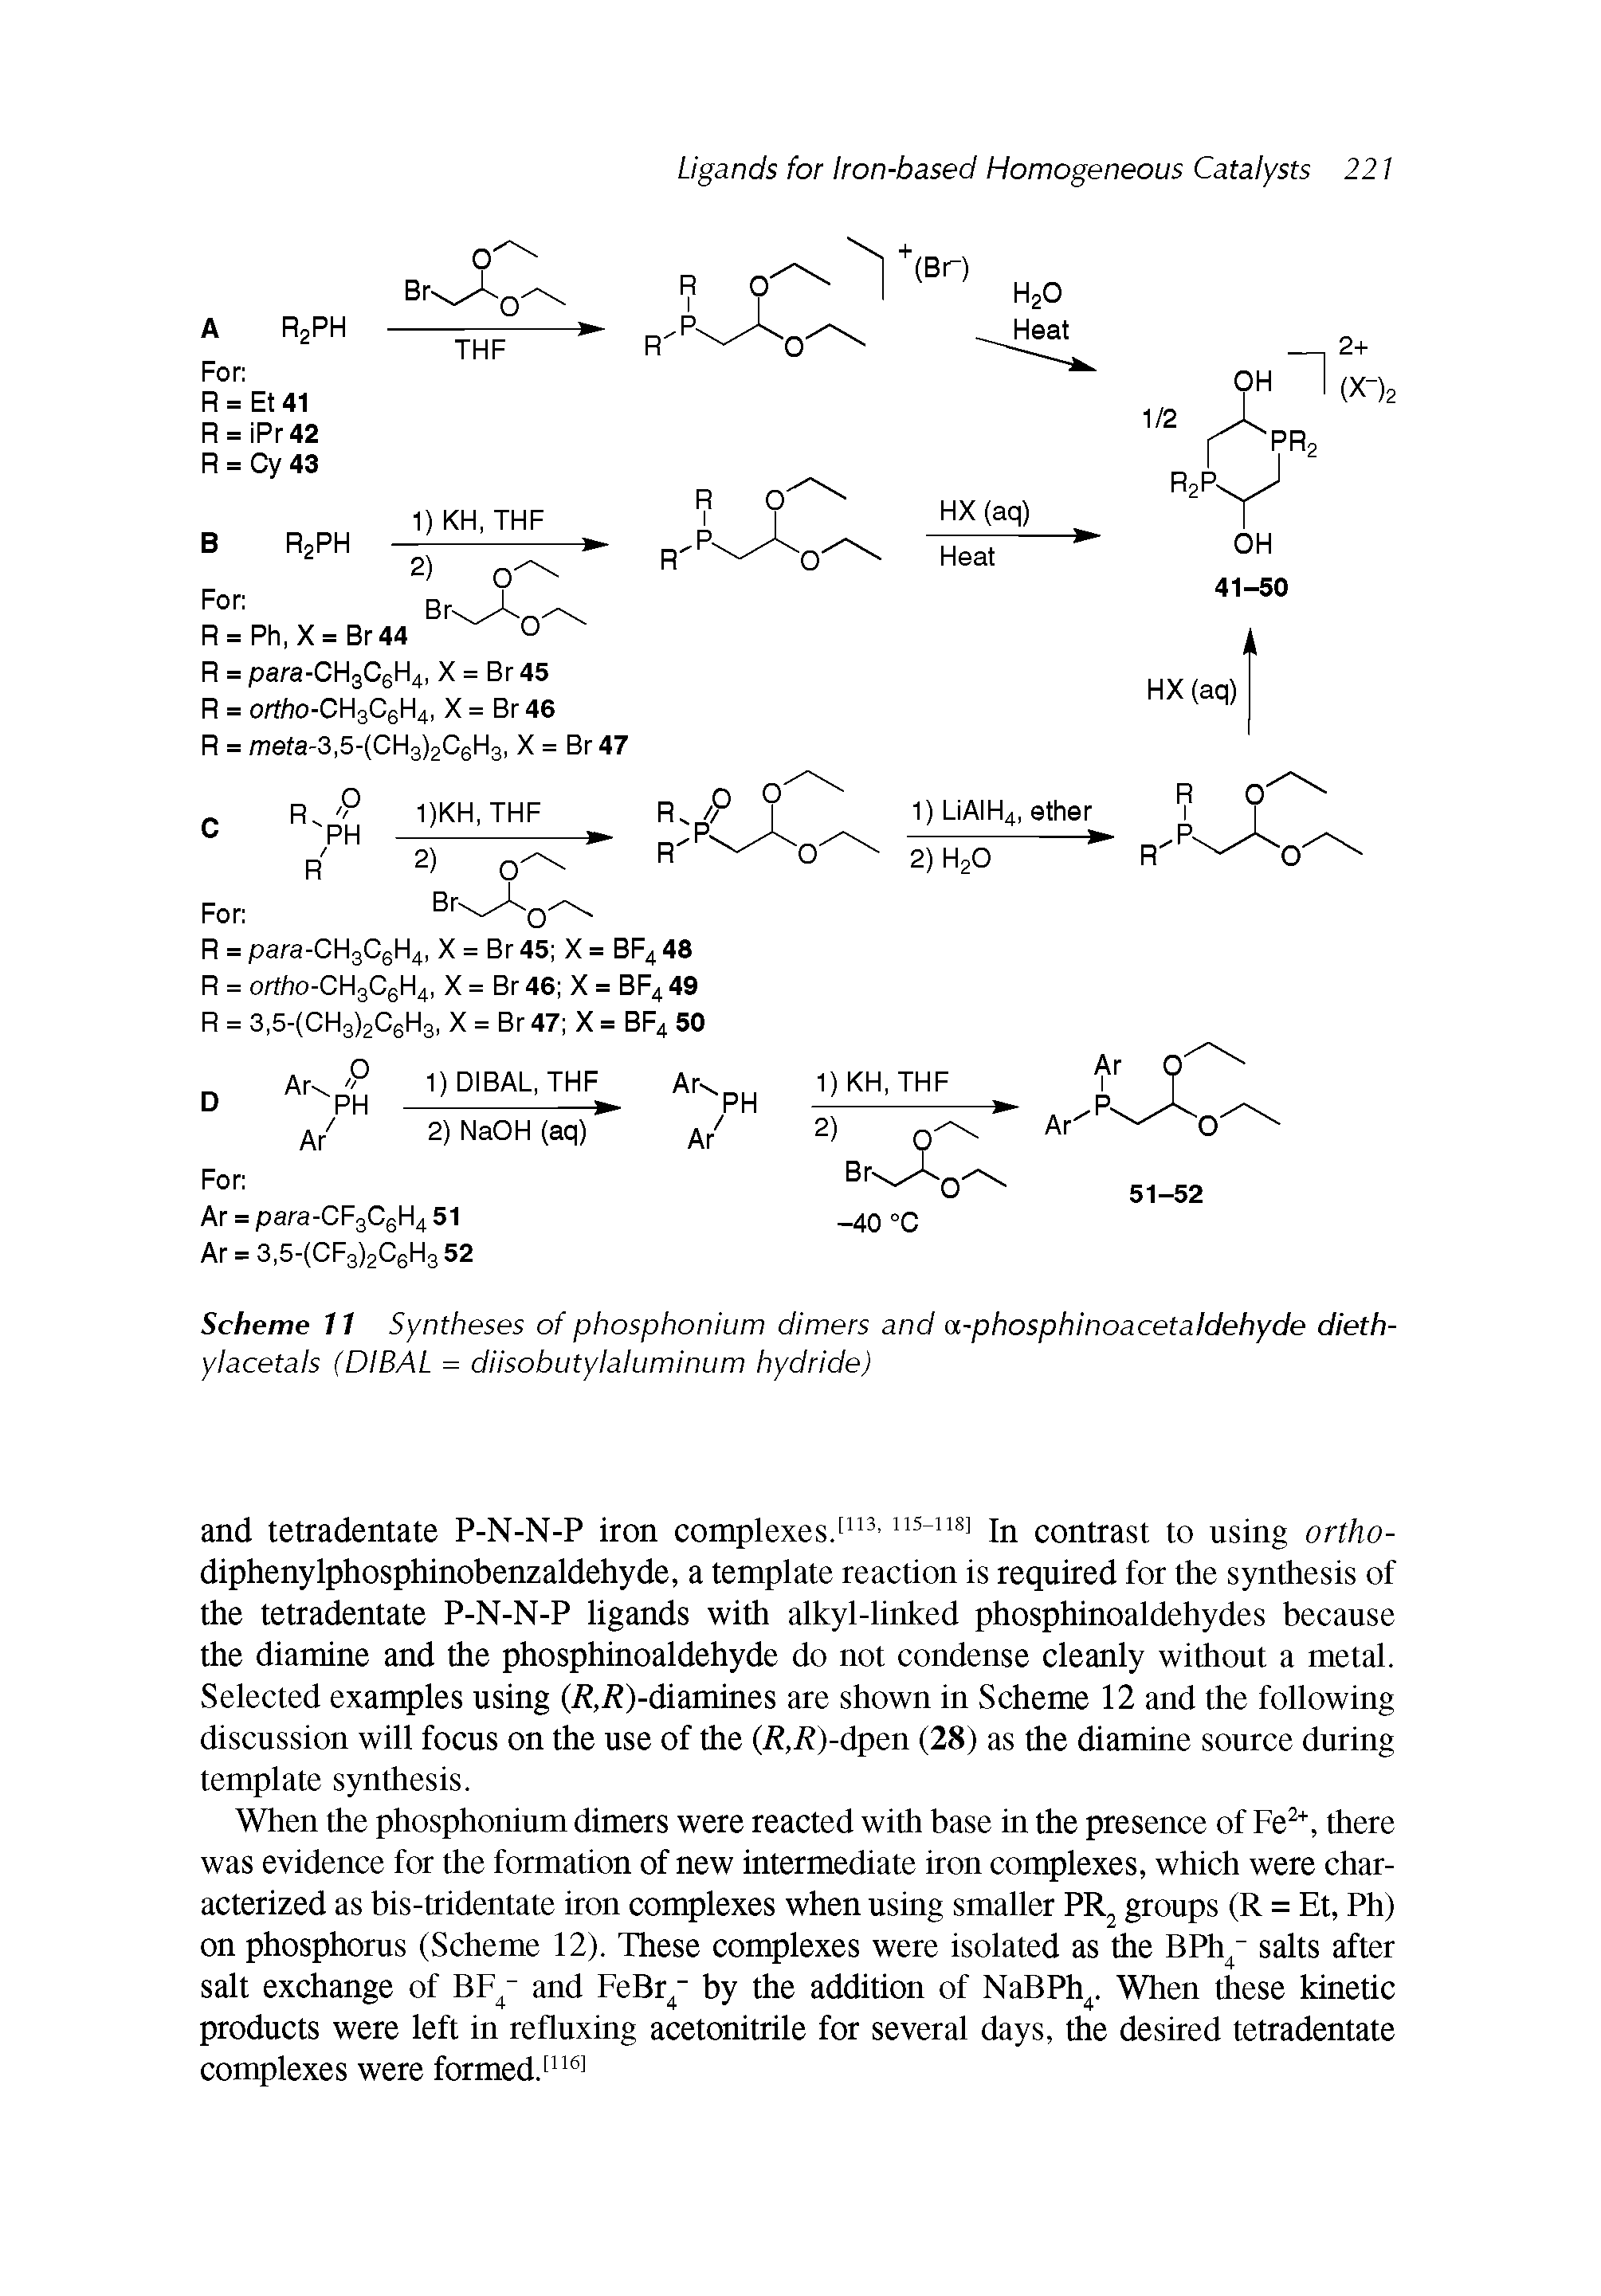 Scheme 11 Syntheses of phosphonium dimers and a-phosphinoacetaldehyde diethyl acetals (DIBAL = diisobutylaluminum hydride)...